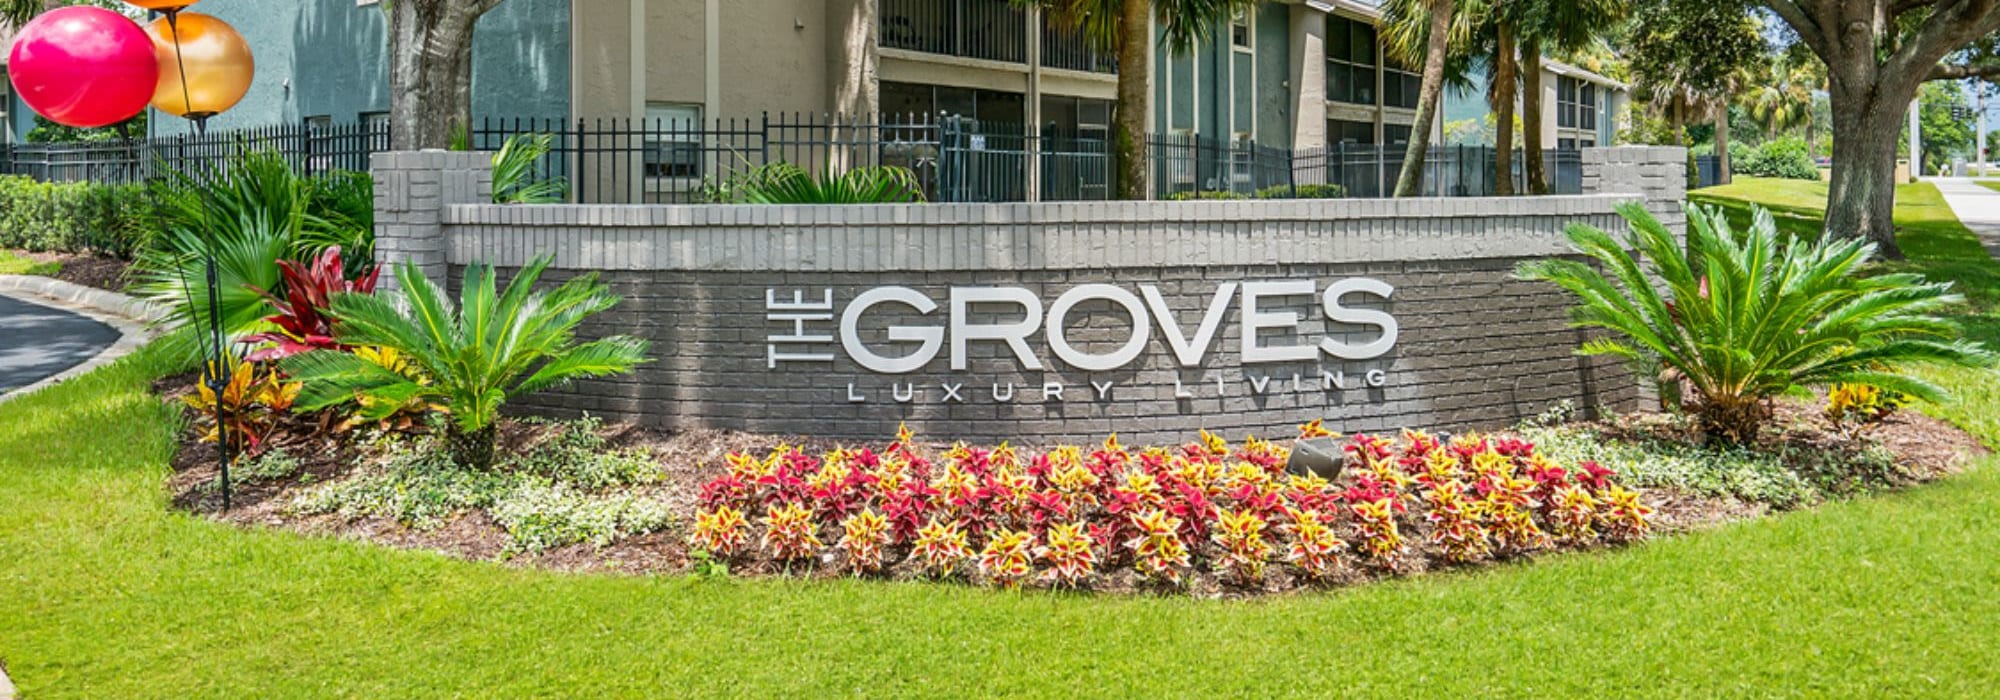 Accessibility Statement at The Groves in Port Orange, Florida